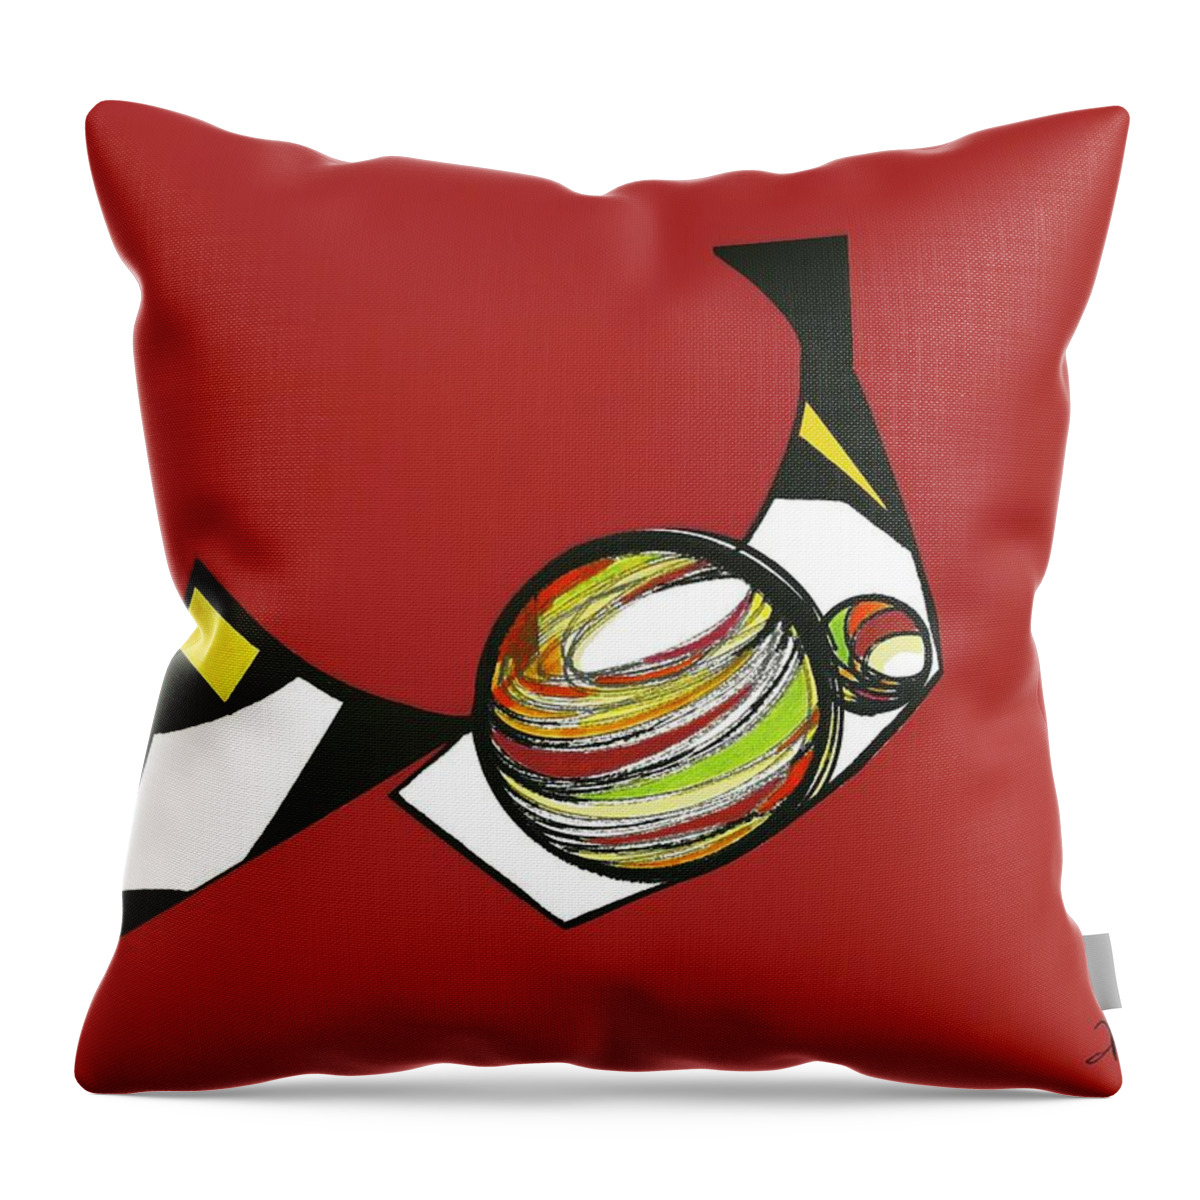 Still Life Throw Pillow featuring the painting Abstract Still Life by Mary Zimmerman